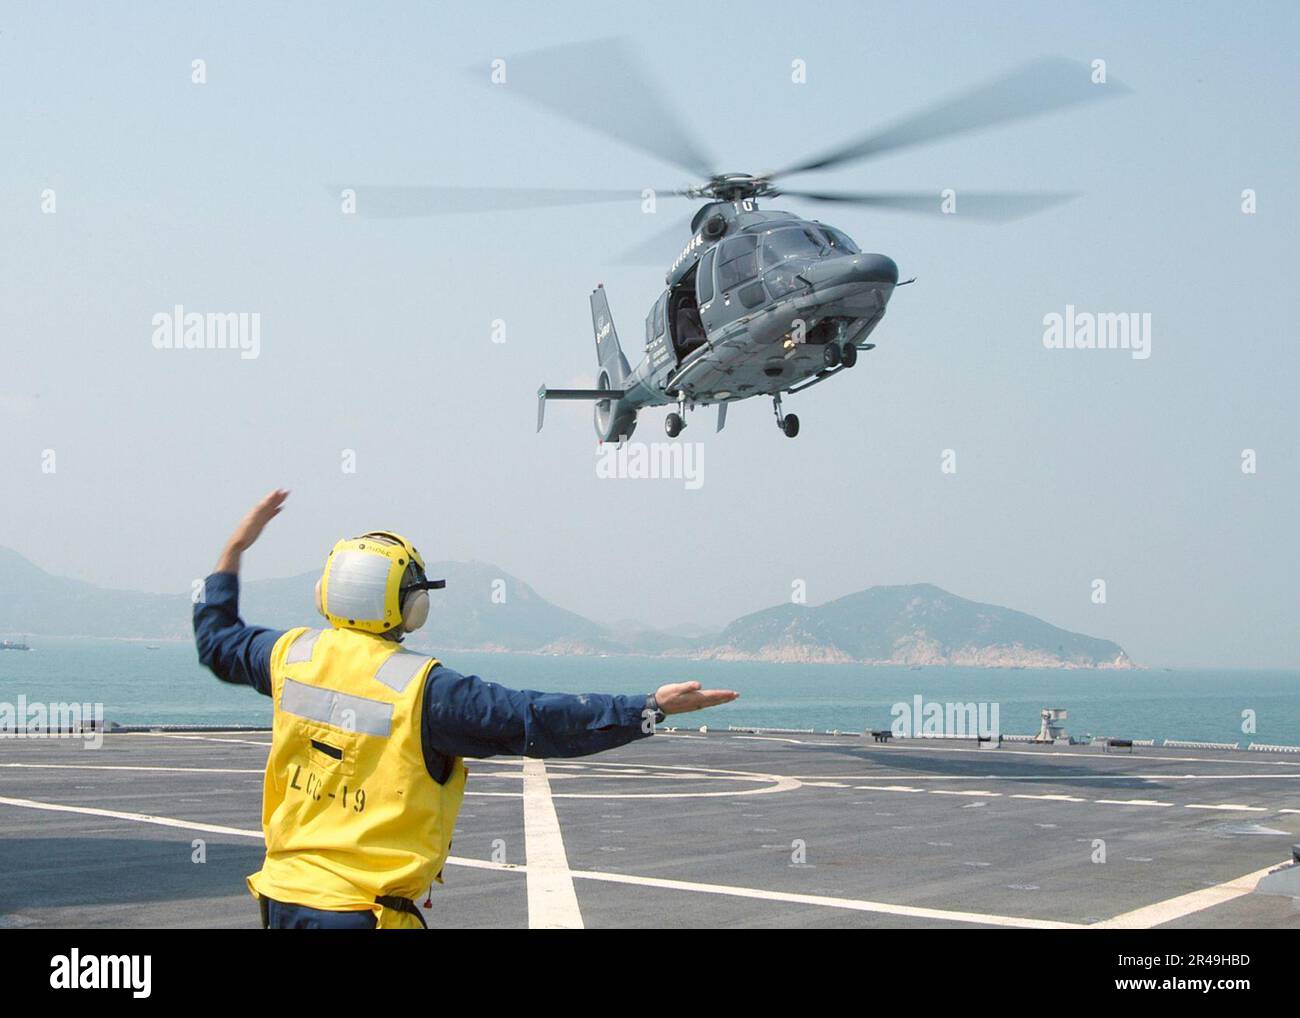 US Navy Landing Signalman Enlisted (LSE) Boatswain's Mate 1st Class from Seattle, Wash., signals an EC-155 Dauphin helicopter from the Hong Kong Government Flying Service to depart the flight deck Stock Photo